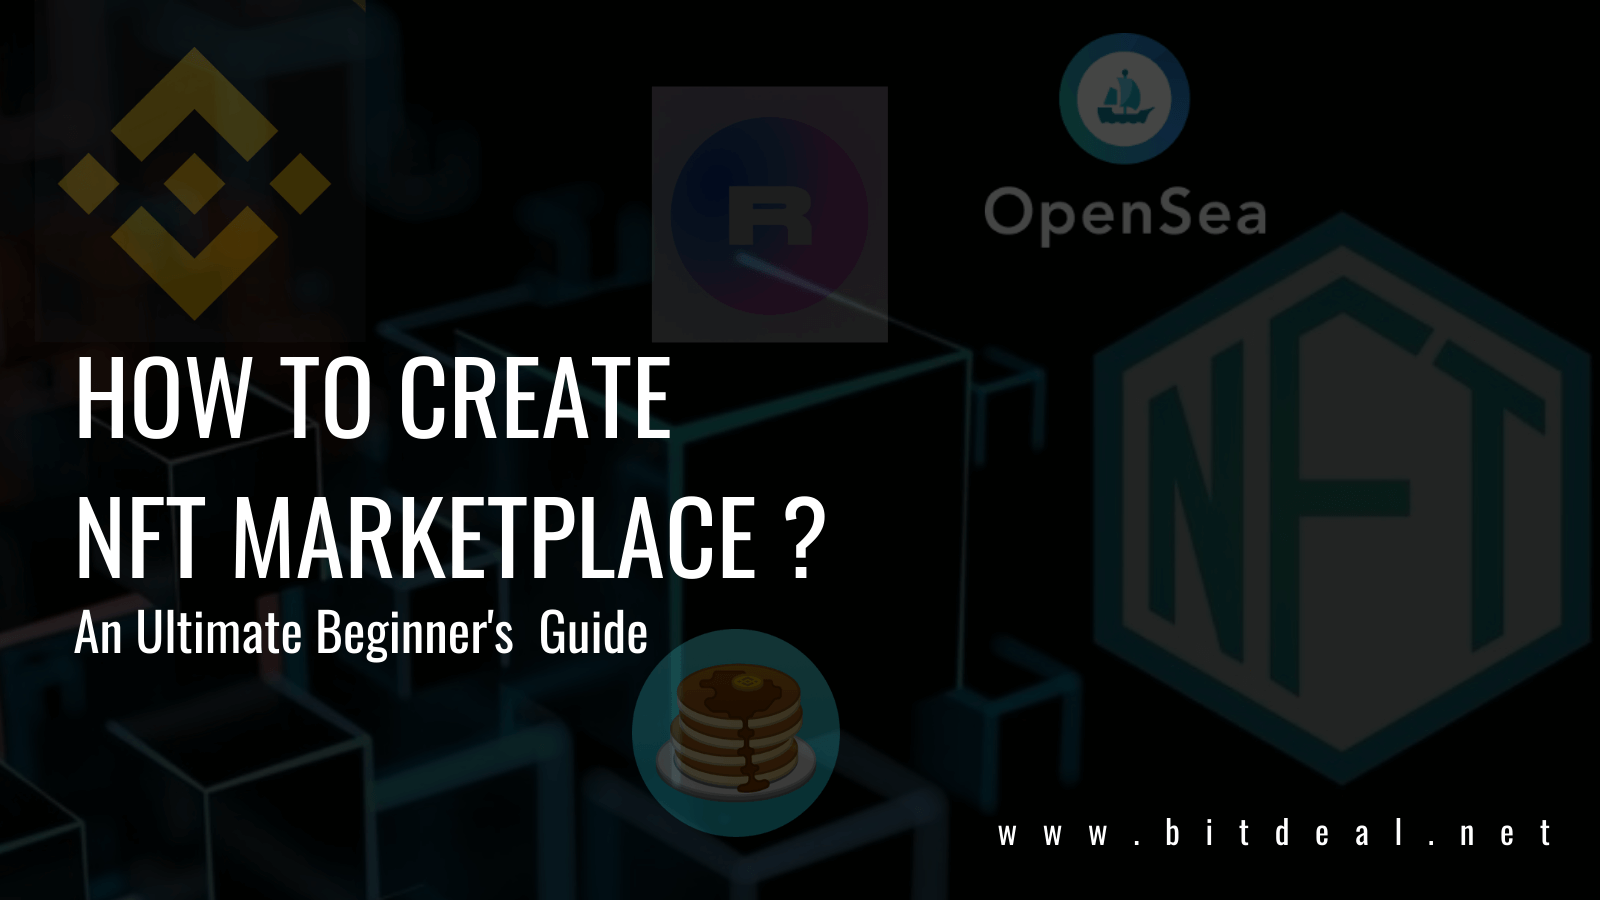 How To Build Your Own NFT Marketplace Like Opensea, Rarible, Binance NFT ?